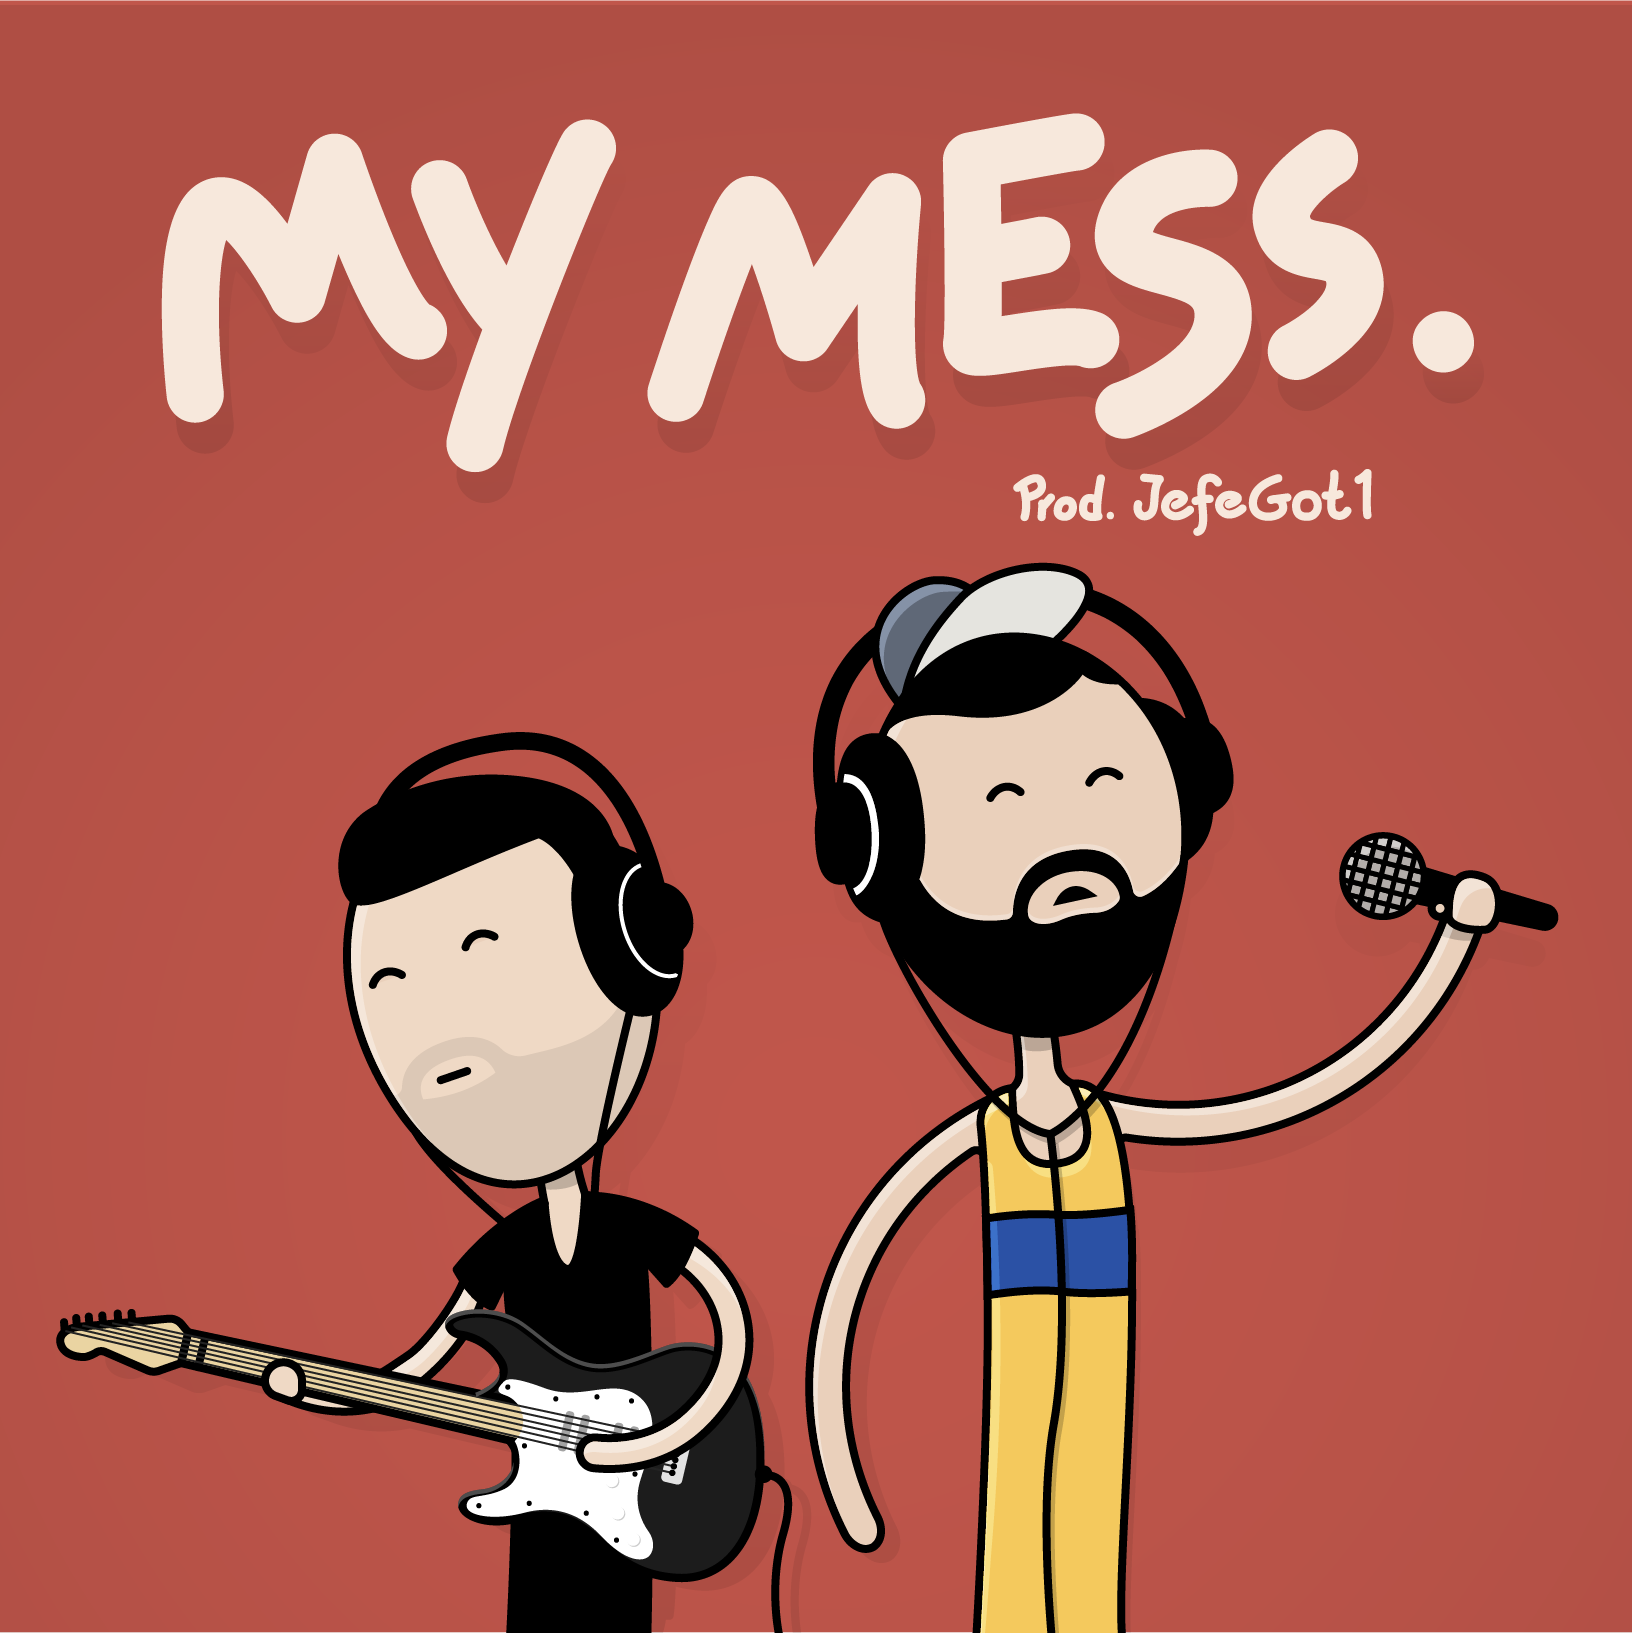 My Mess cover_02.png